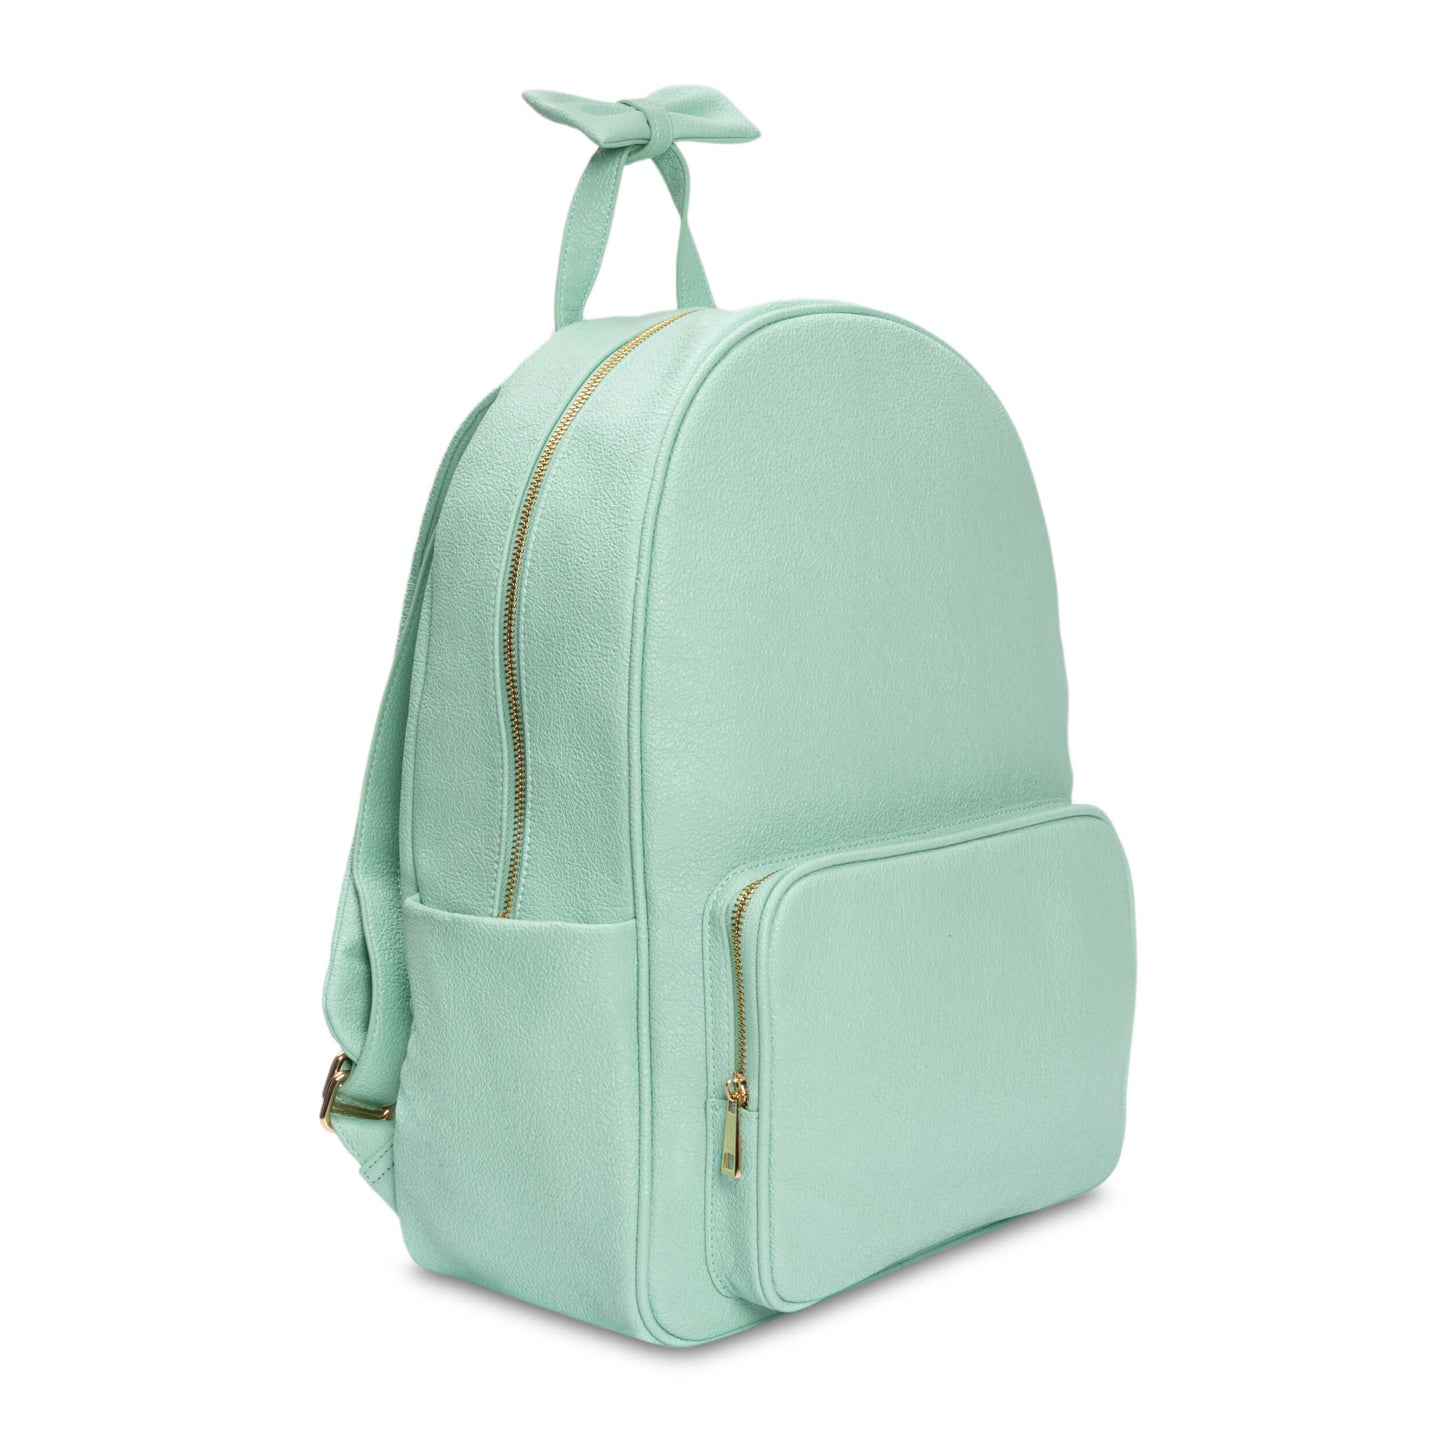 The Taly Backpack - Blessed Aqua (Customizable)